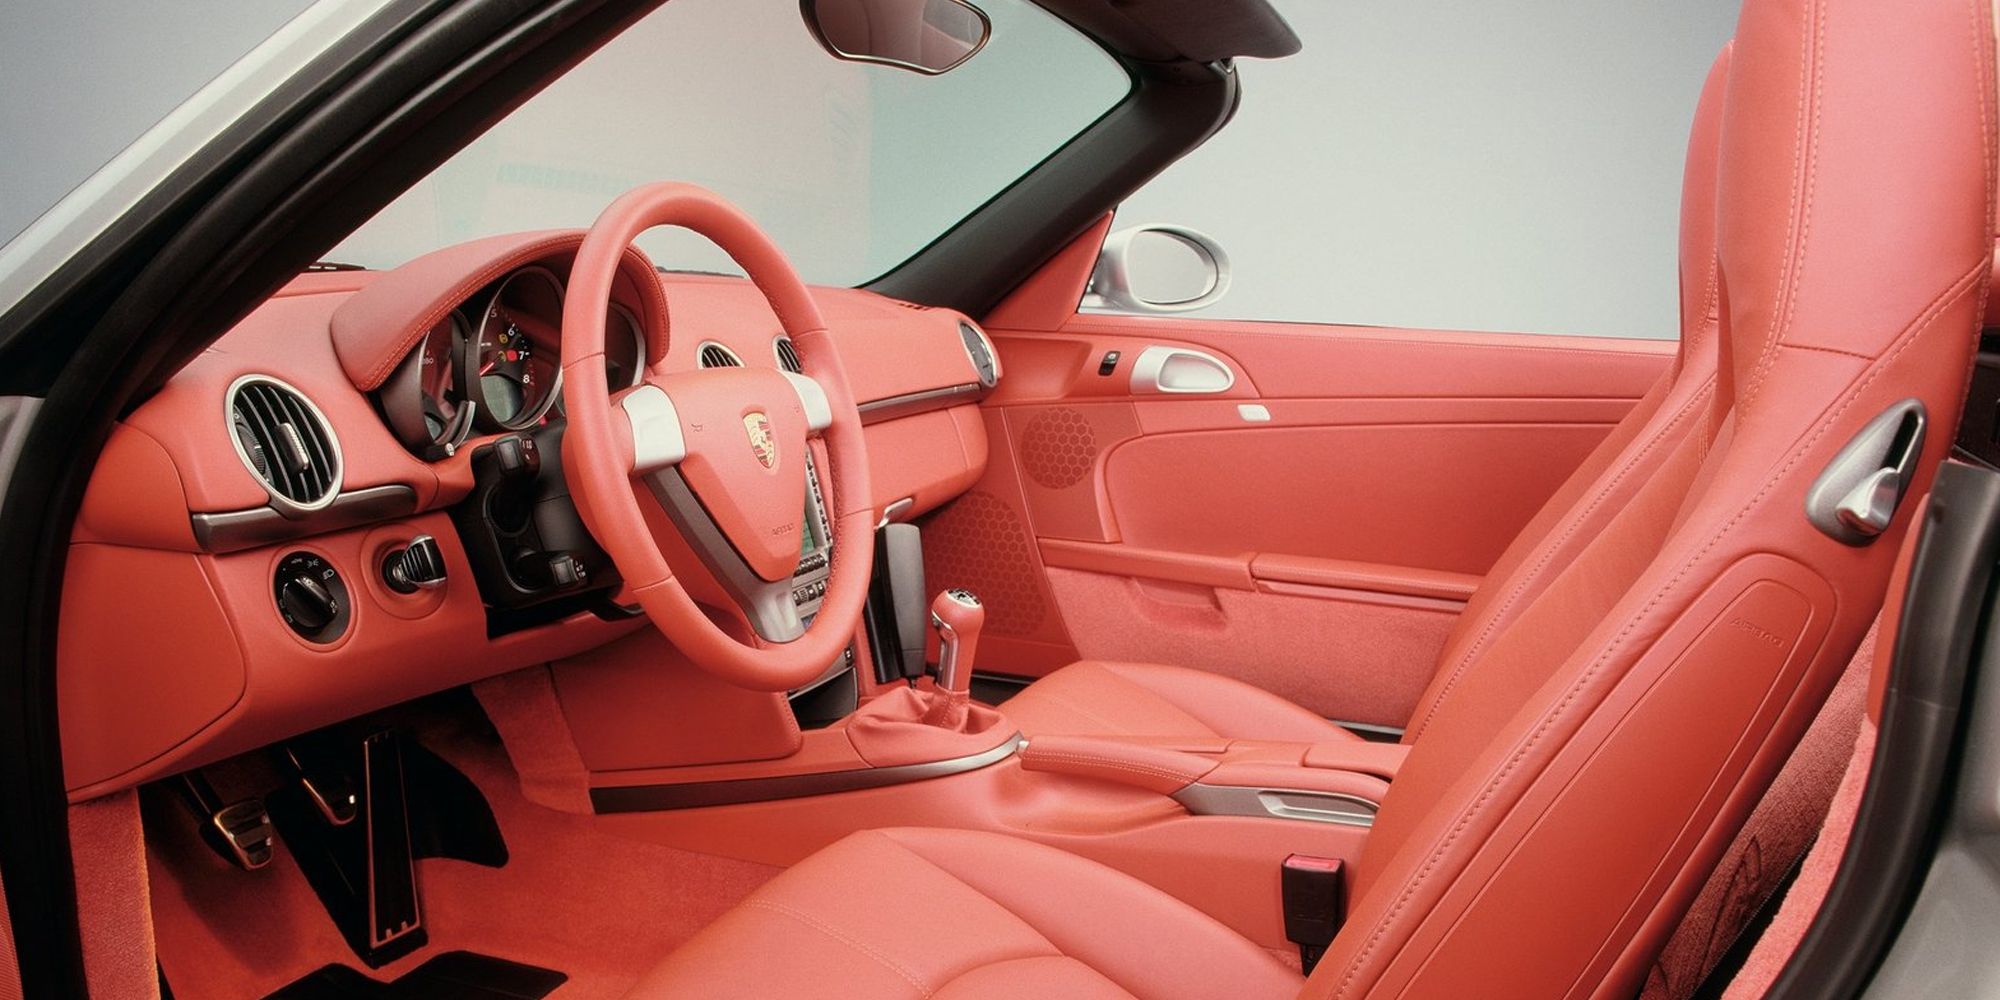 The interior of the facelift 986 Boxster, in red